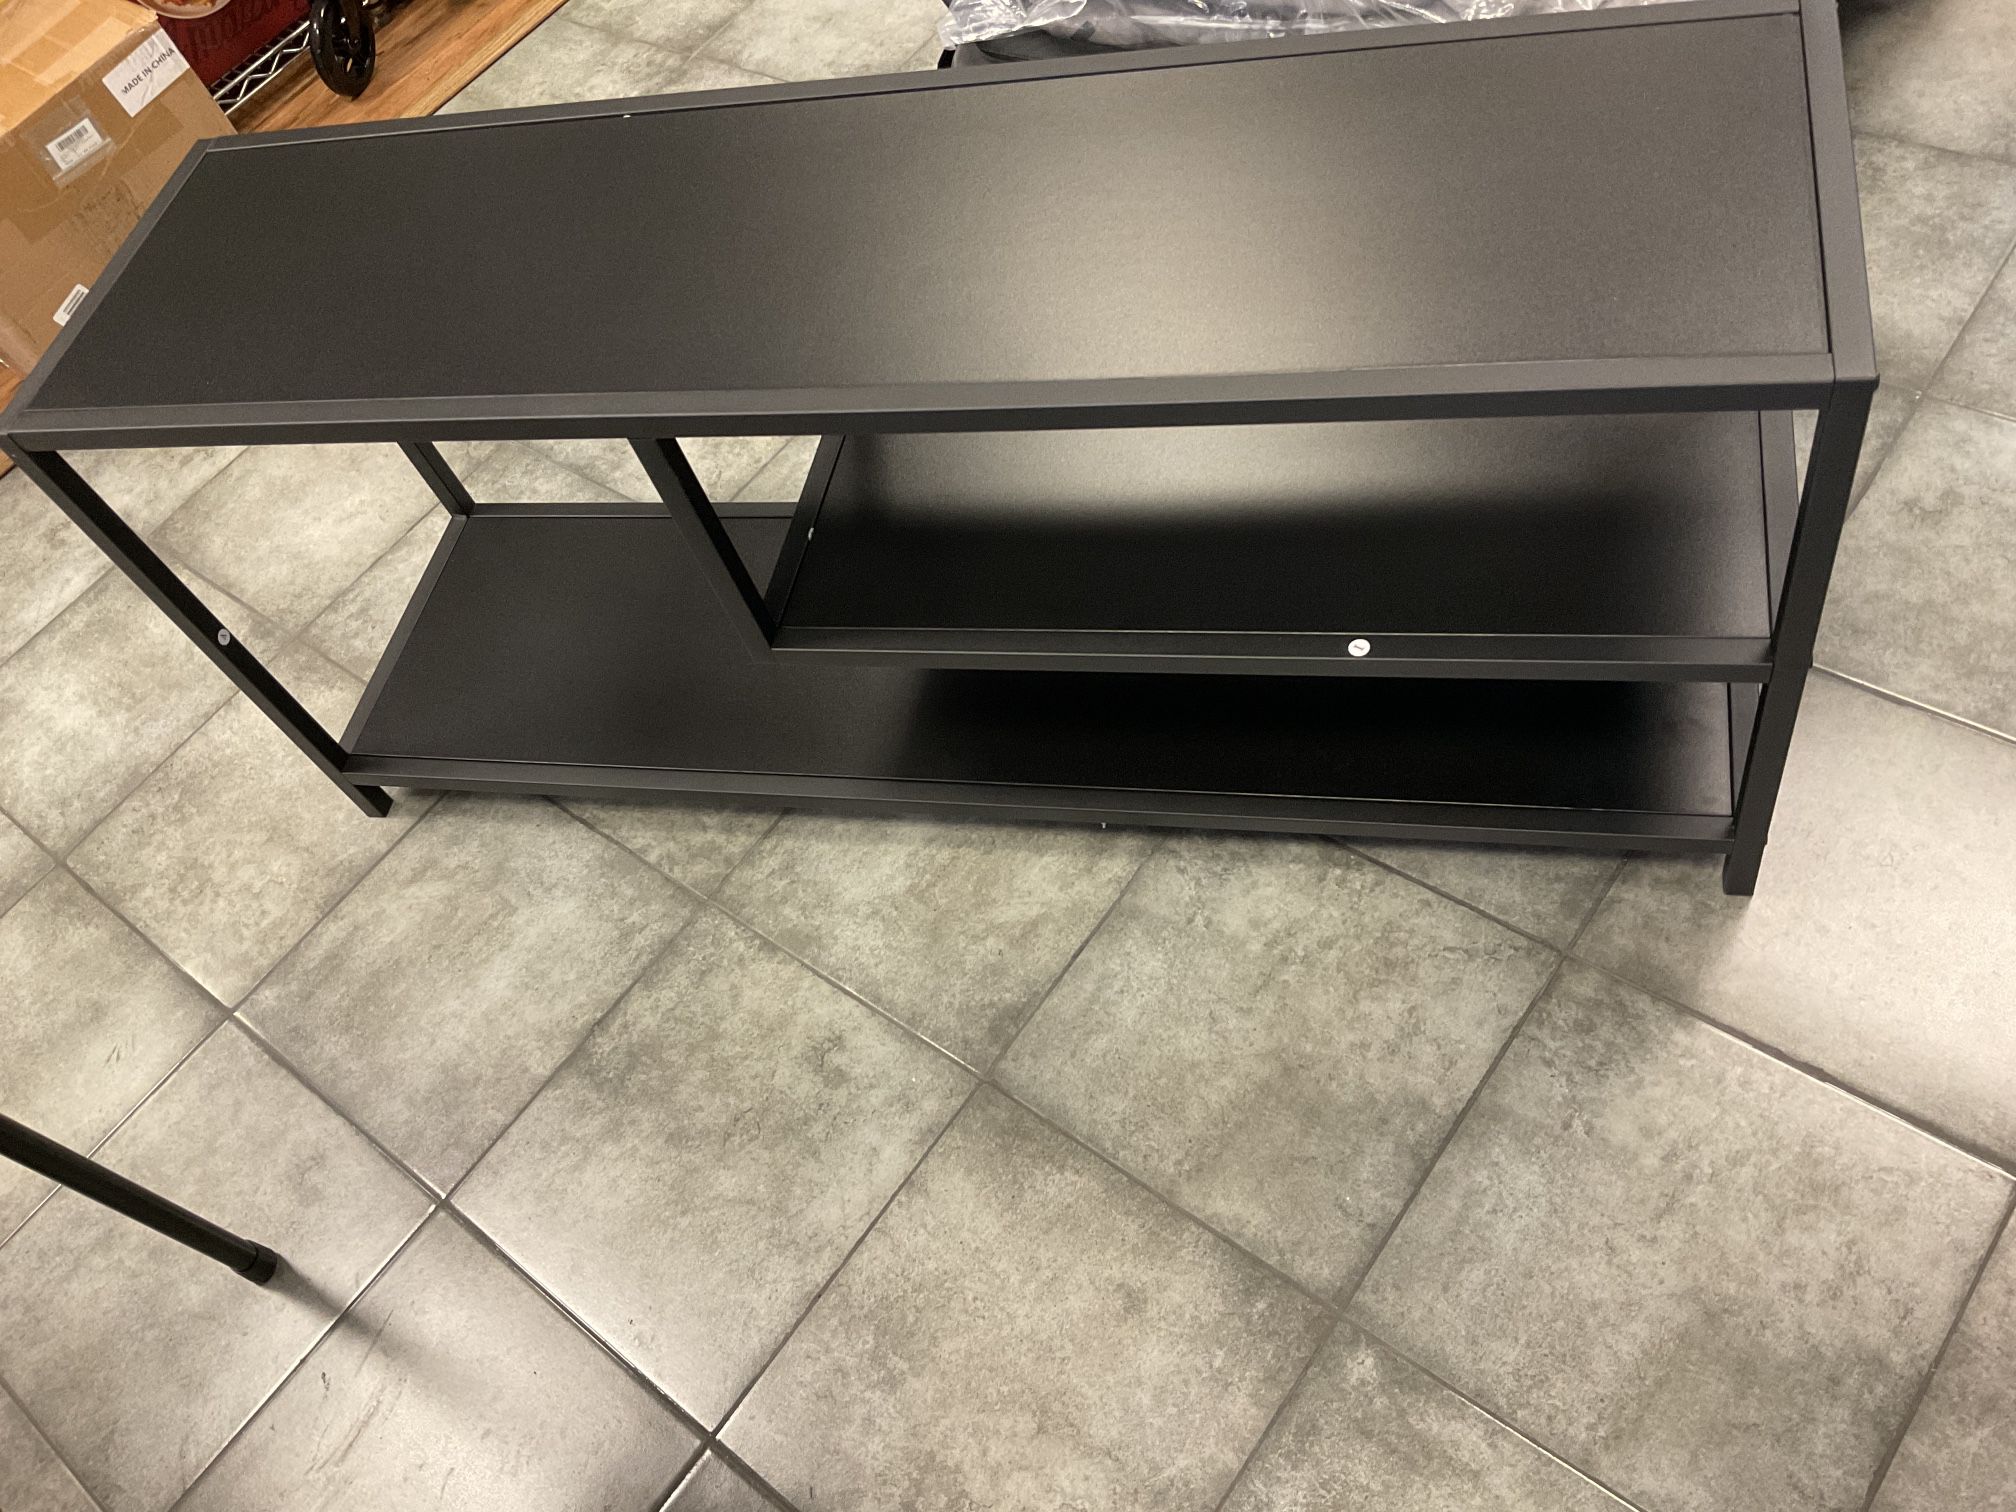 TV STAND FOR TV UP TO 55 Inch